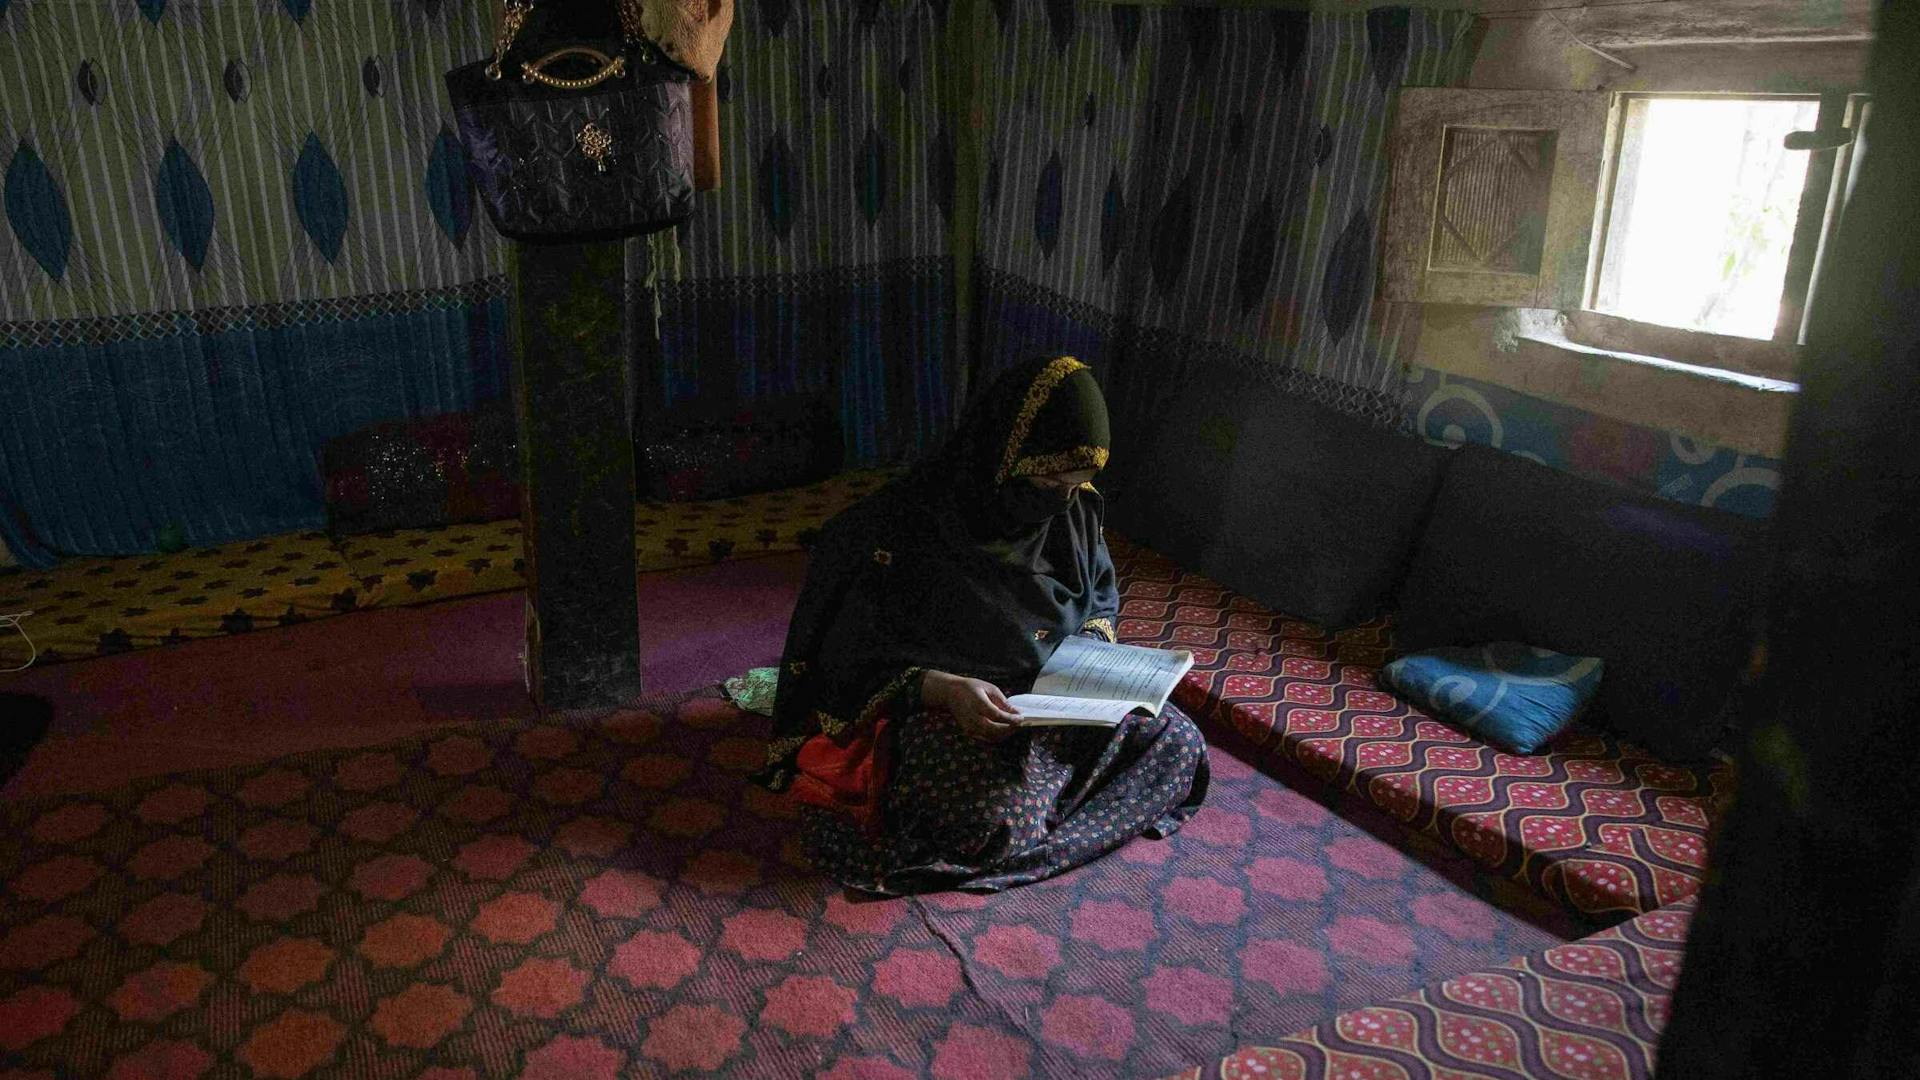 A veiled woman sits on a carpet and reads in a dimly-lit room.